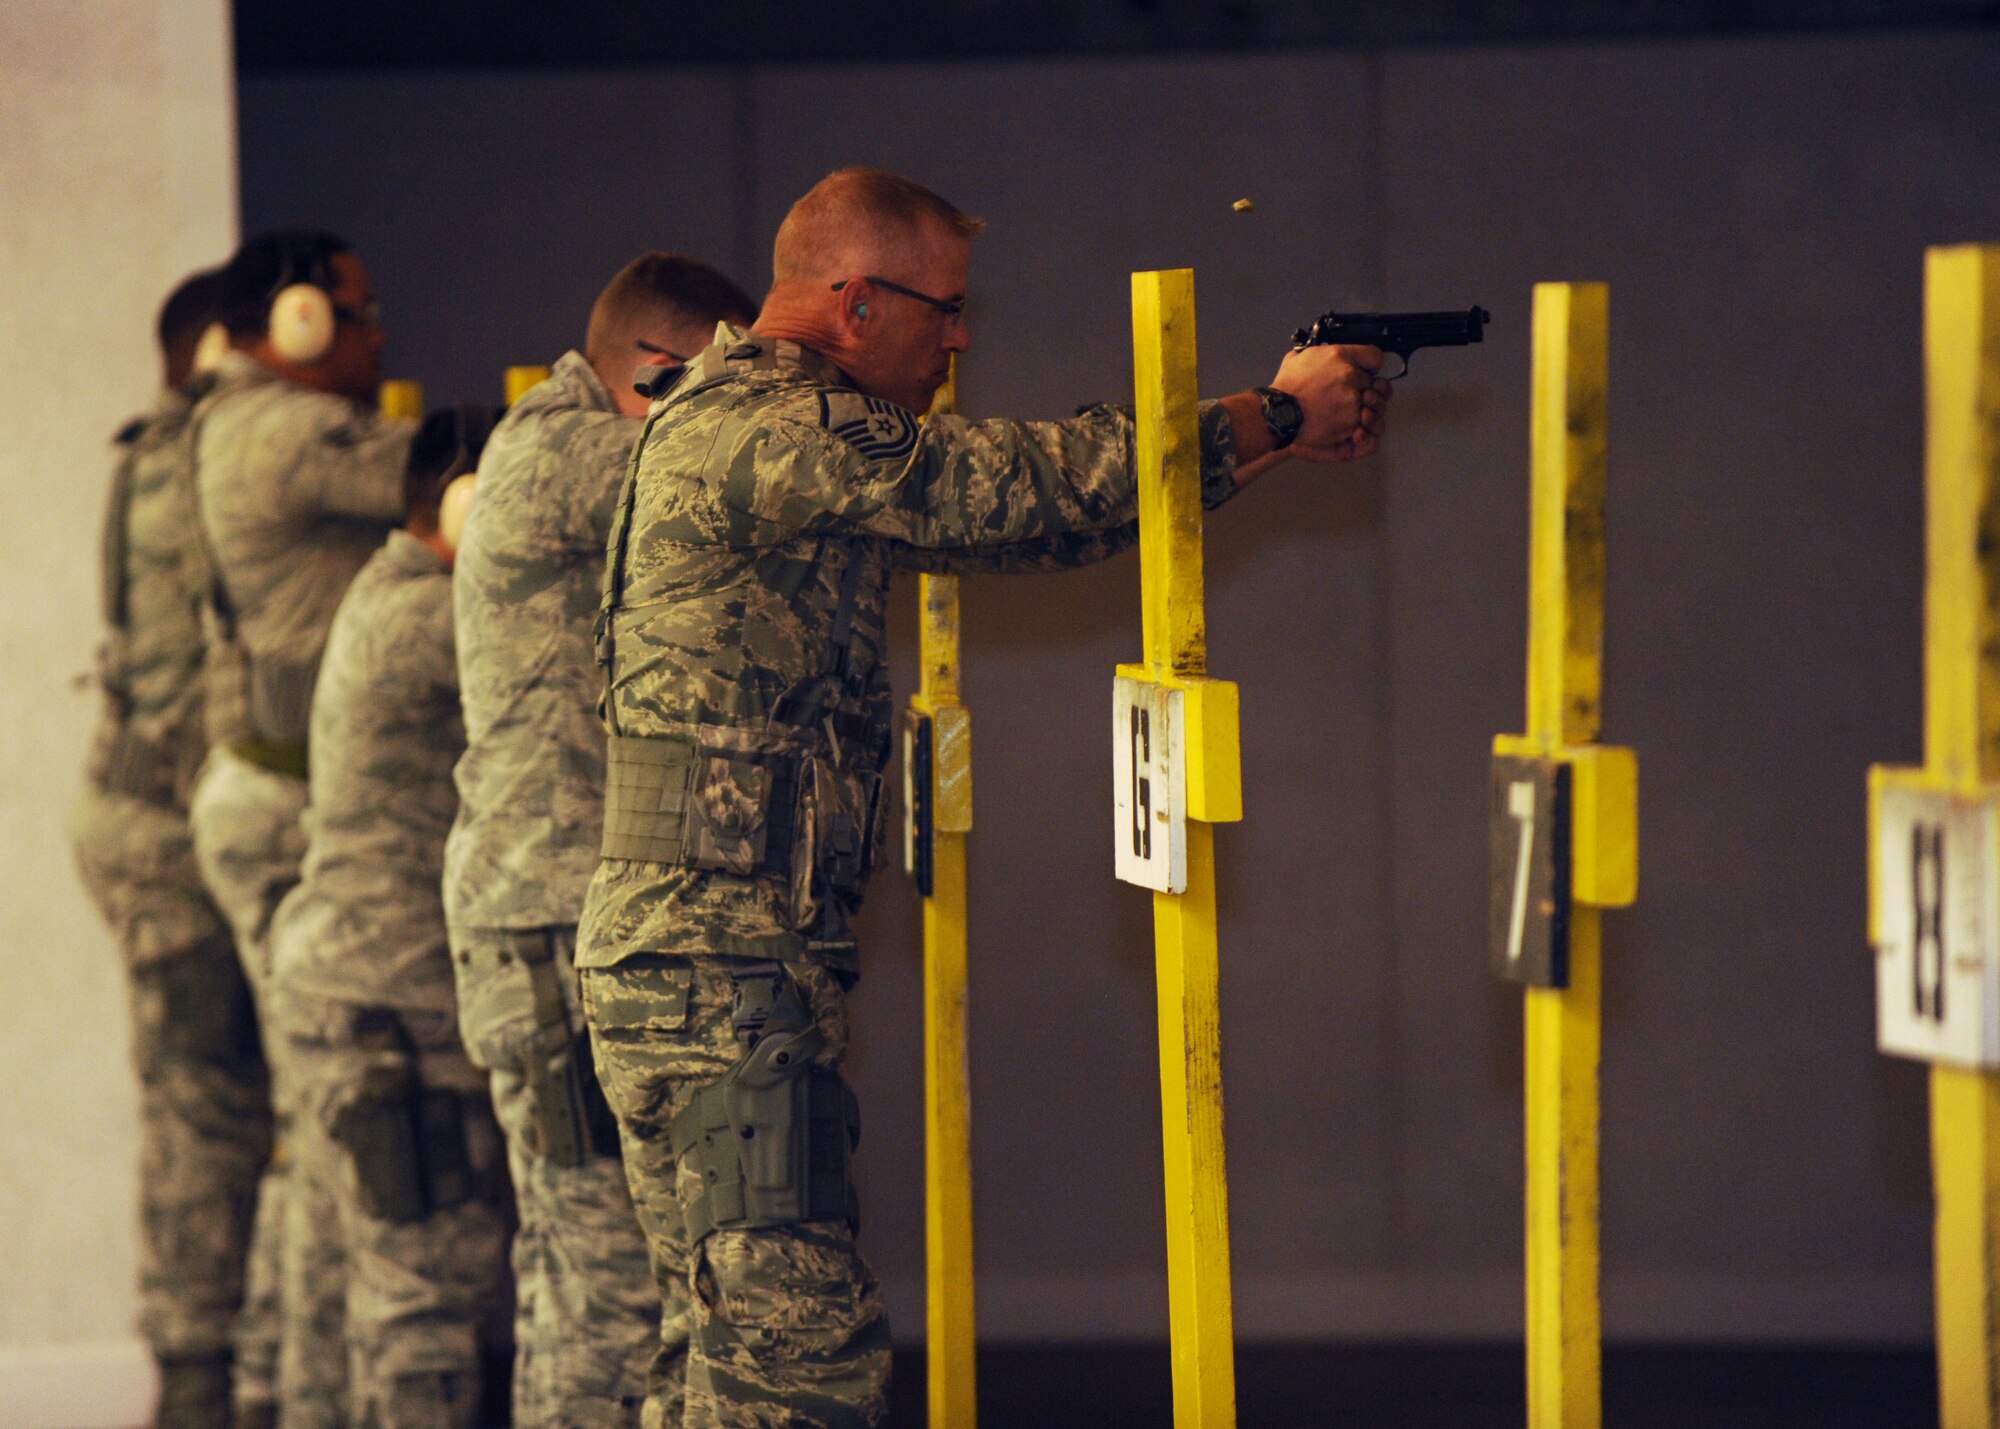 Airmen from the 28th Security Forces Squadron fire the M9 pistol during training at Ellsworth Air Force Base, S.D., Oct. 13, 2015. Prior to firing, personnel receive instruction on safety and weapon control using multiple weapon systems. (U.S. Air Force photo by Airman Sadie Colbert/Released)